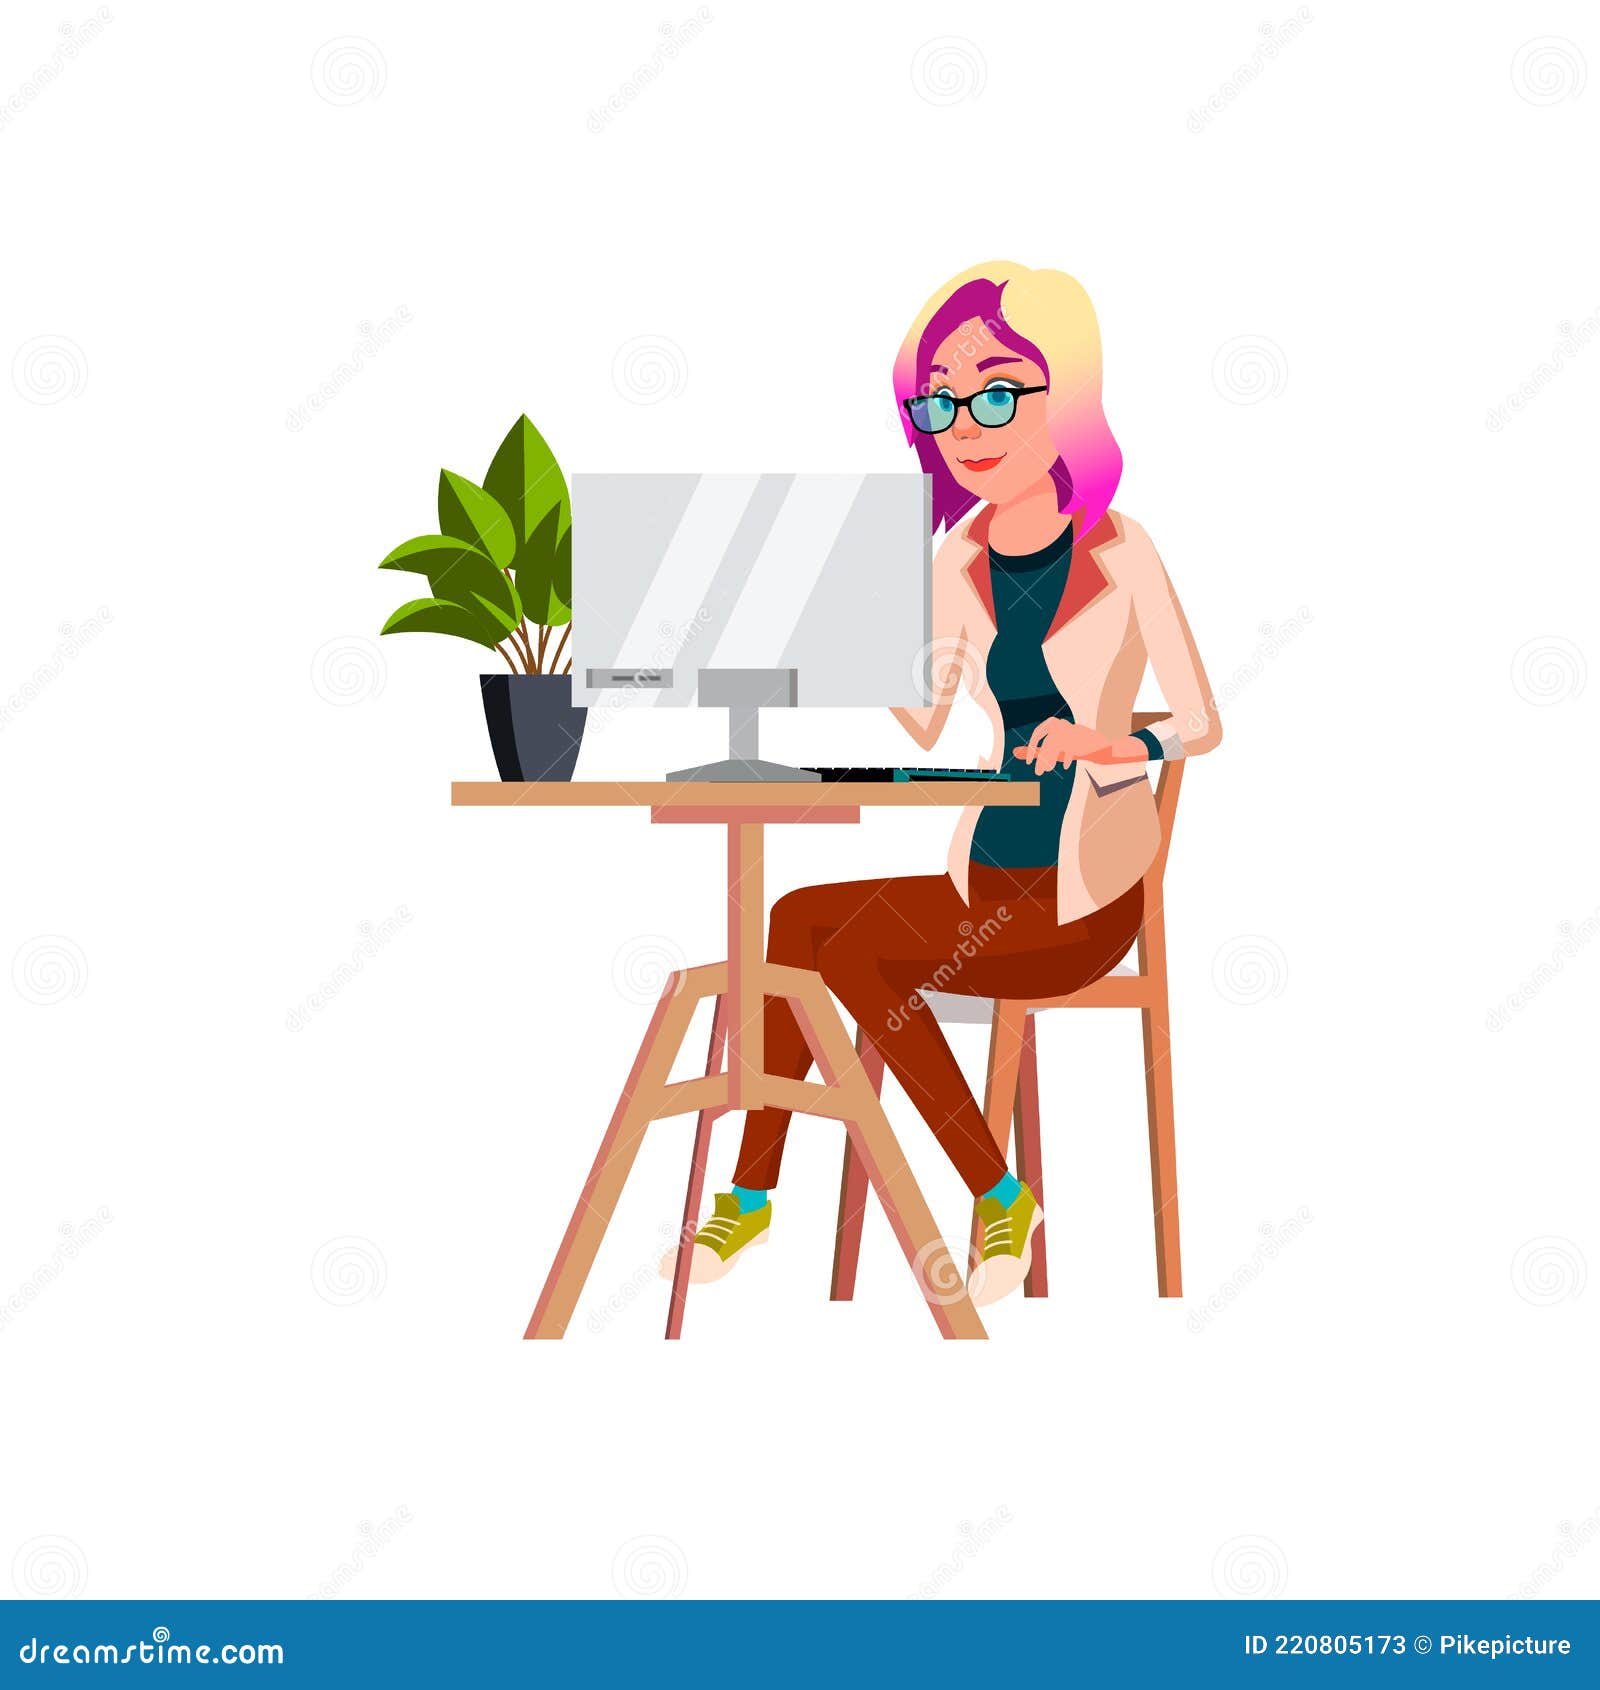 Motivated Young Lady Checking E-mails on Personal Computer at Work Cartoon  Vector Stock Vector - Illustration of lady, woman: 220805173